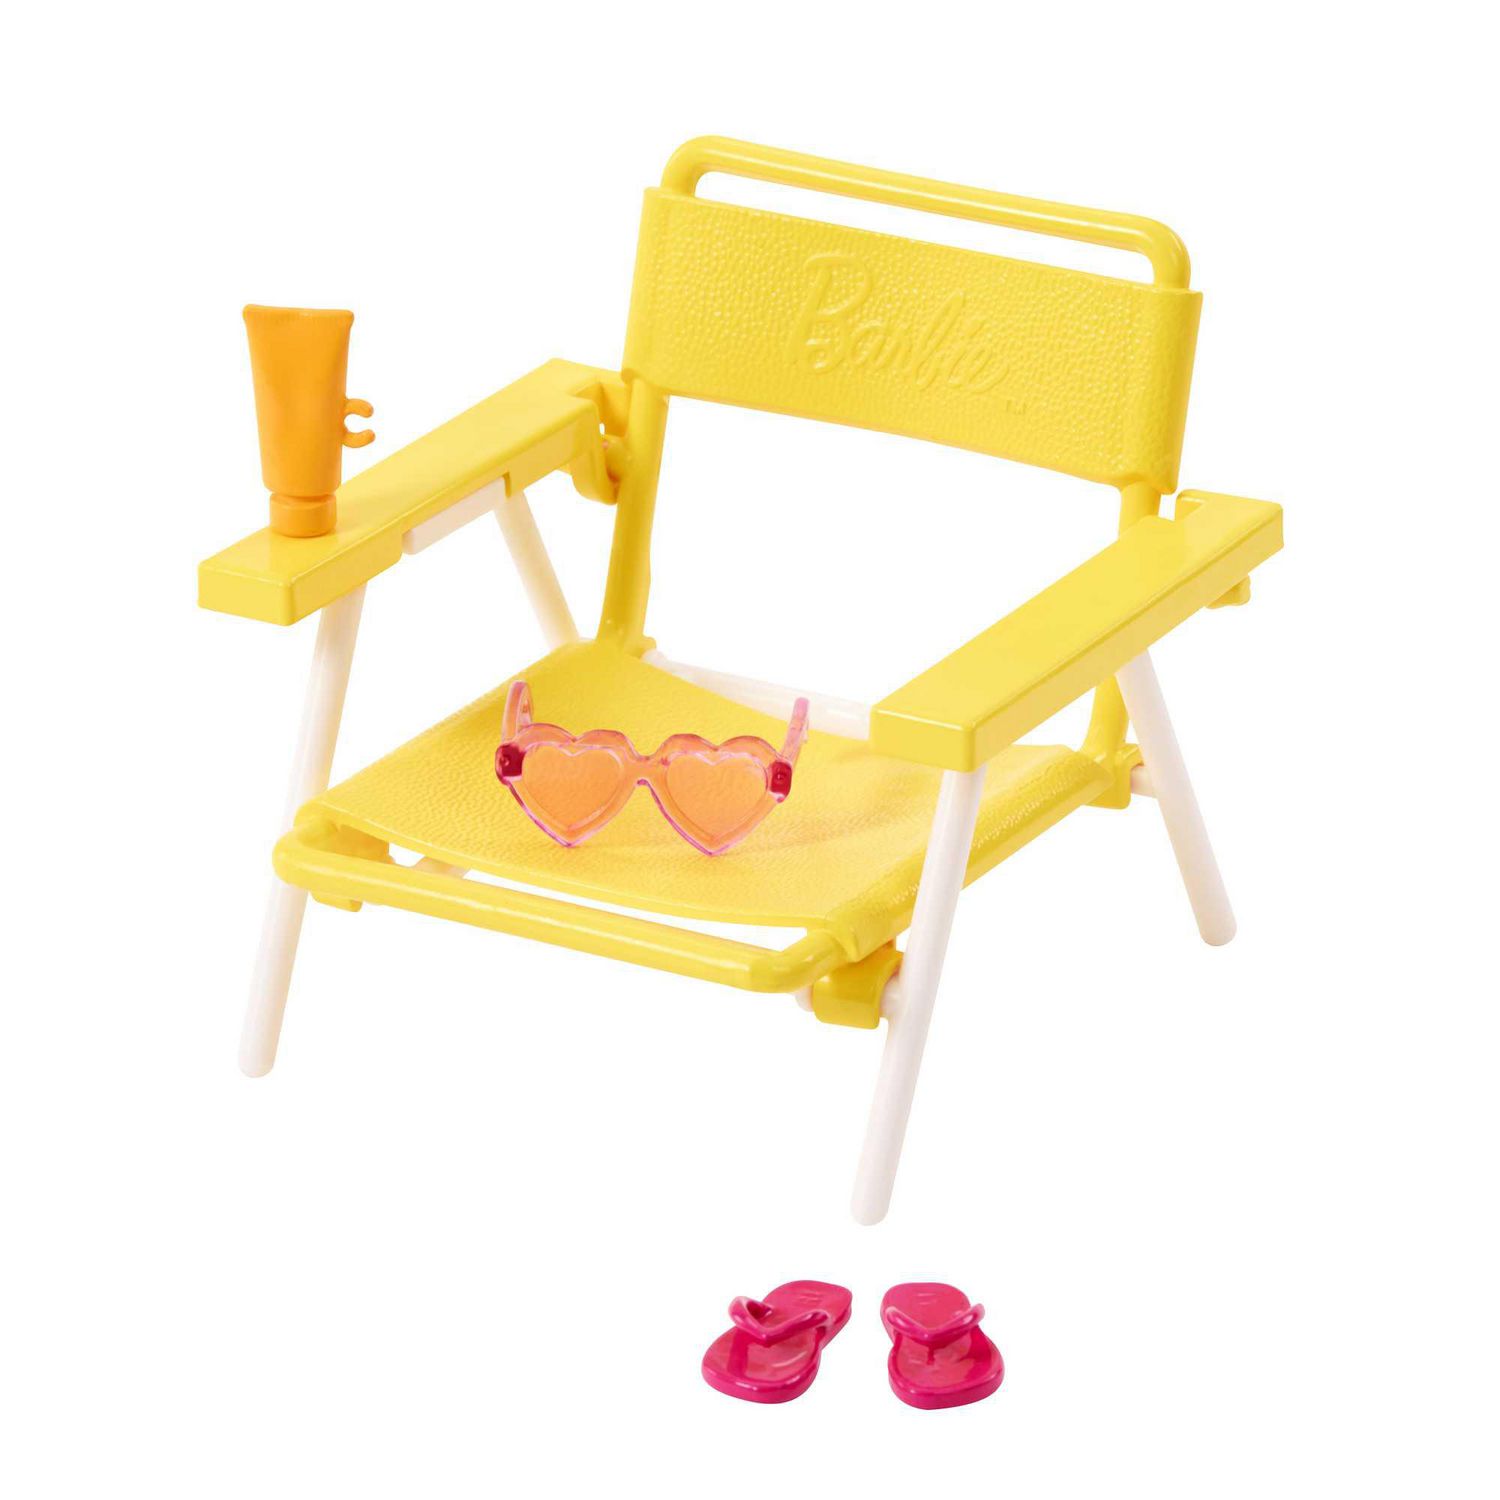 Barbie Accessories, Doll House Furniture, Pool Day Story Starter